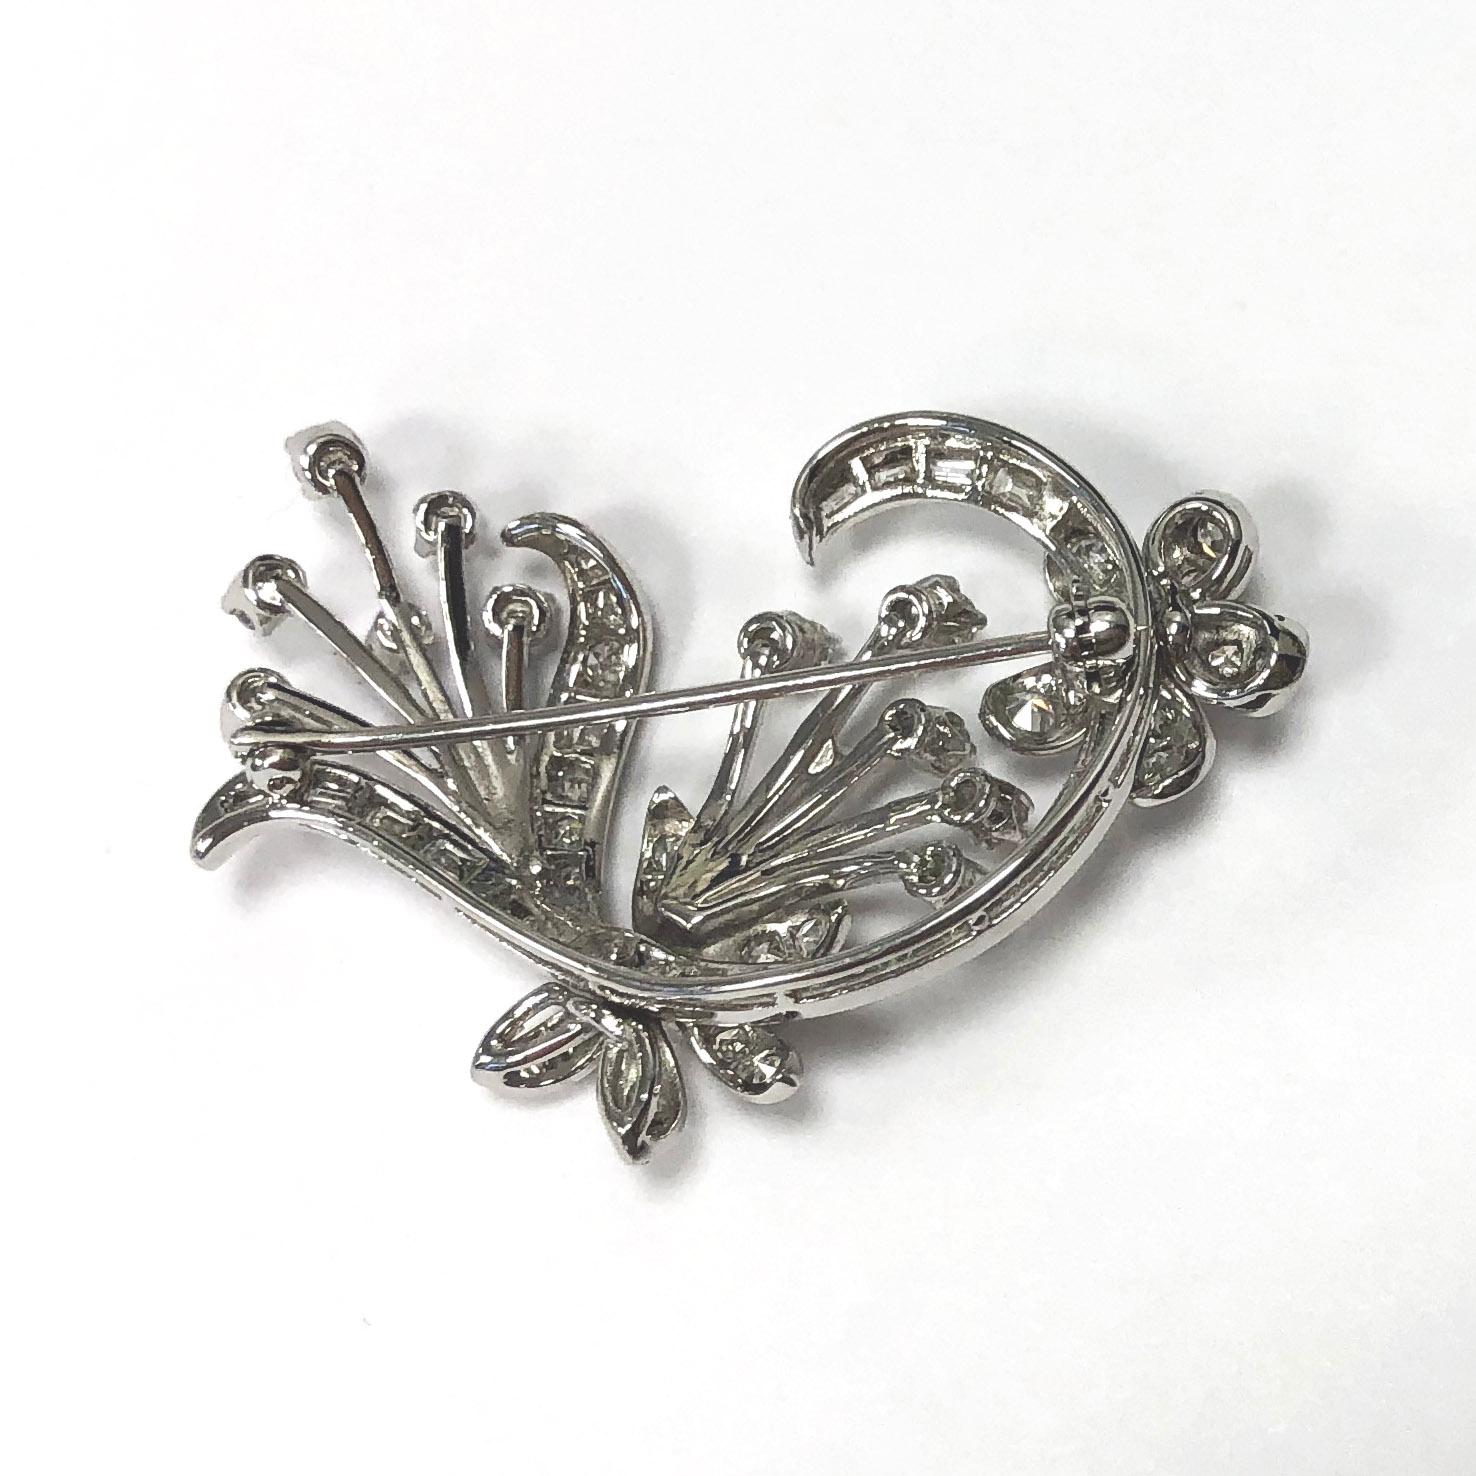 14Kt White Gold Flower Bouquet Brooch with Single Cut and Baguette Diamonds with a safety ''C'' clasp. 

- 29 Single Cut Diamonds = approx. 0.51 Ct total weight
Clarity SI, Color H

- 14 straight baguette diamonds = approx. 0.28 Ct total